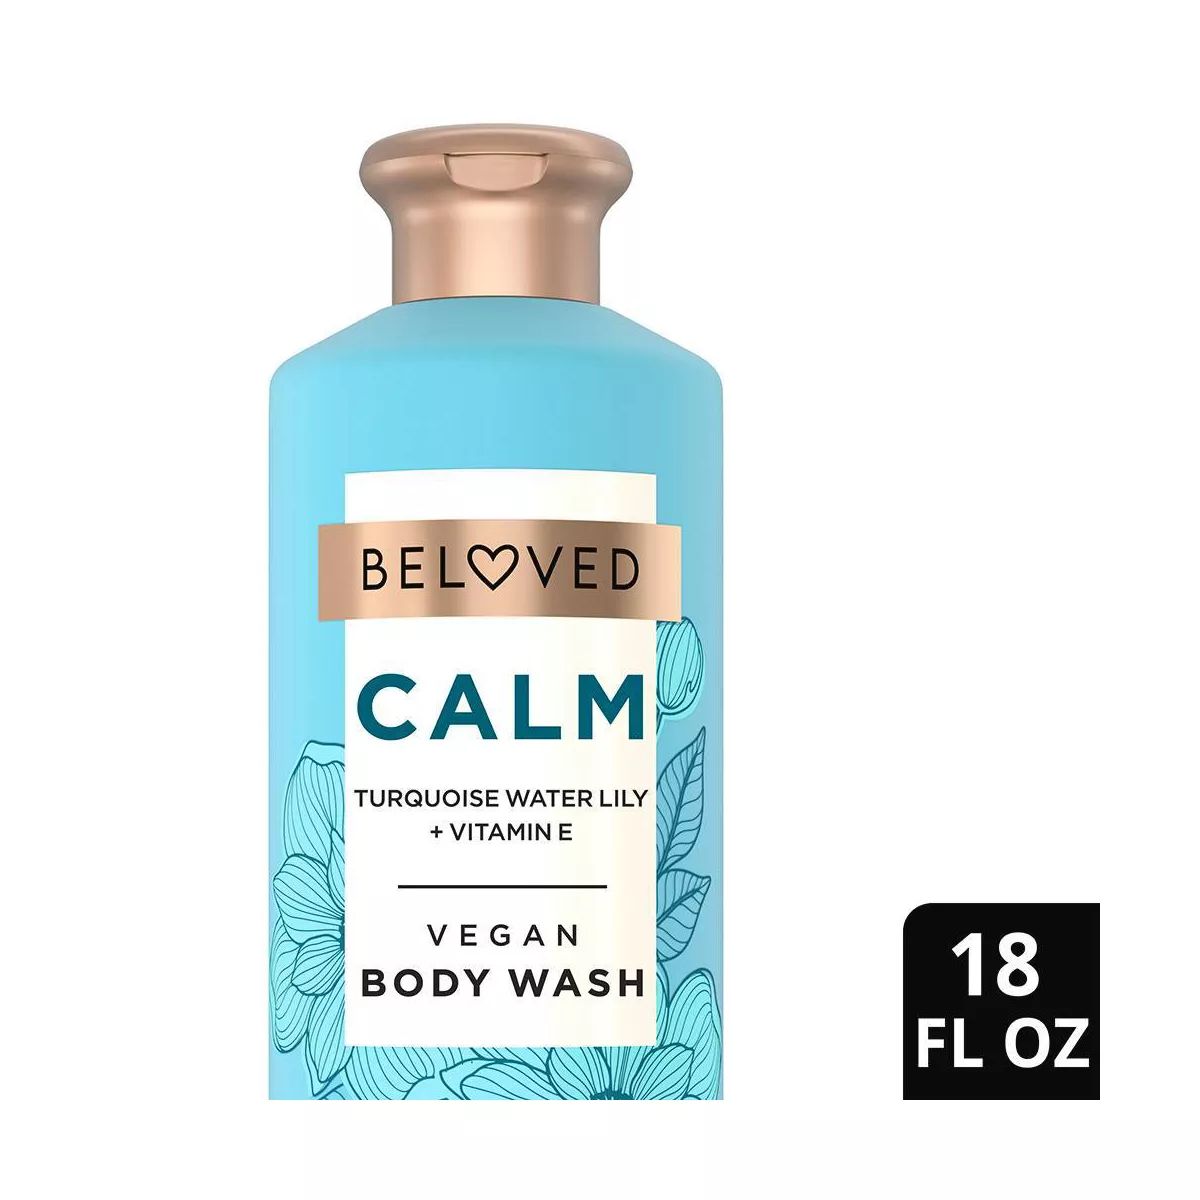 Beloved Calm Vegan Body Wash with Turquoise Water Lily & Vitamin E - 18 fl oz | Target